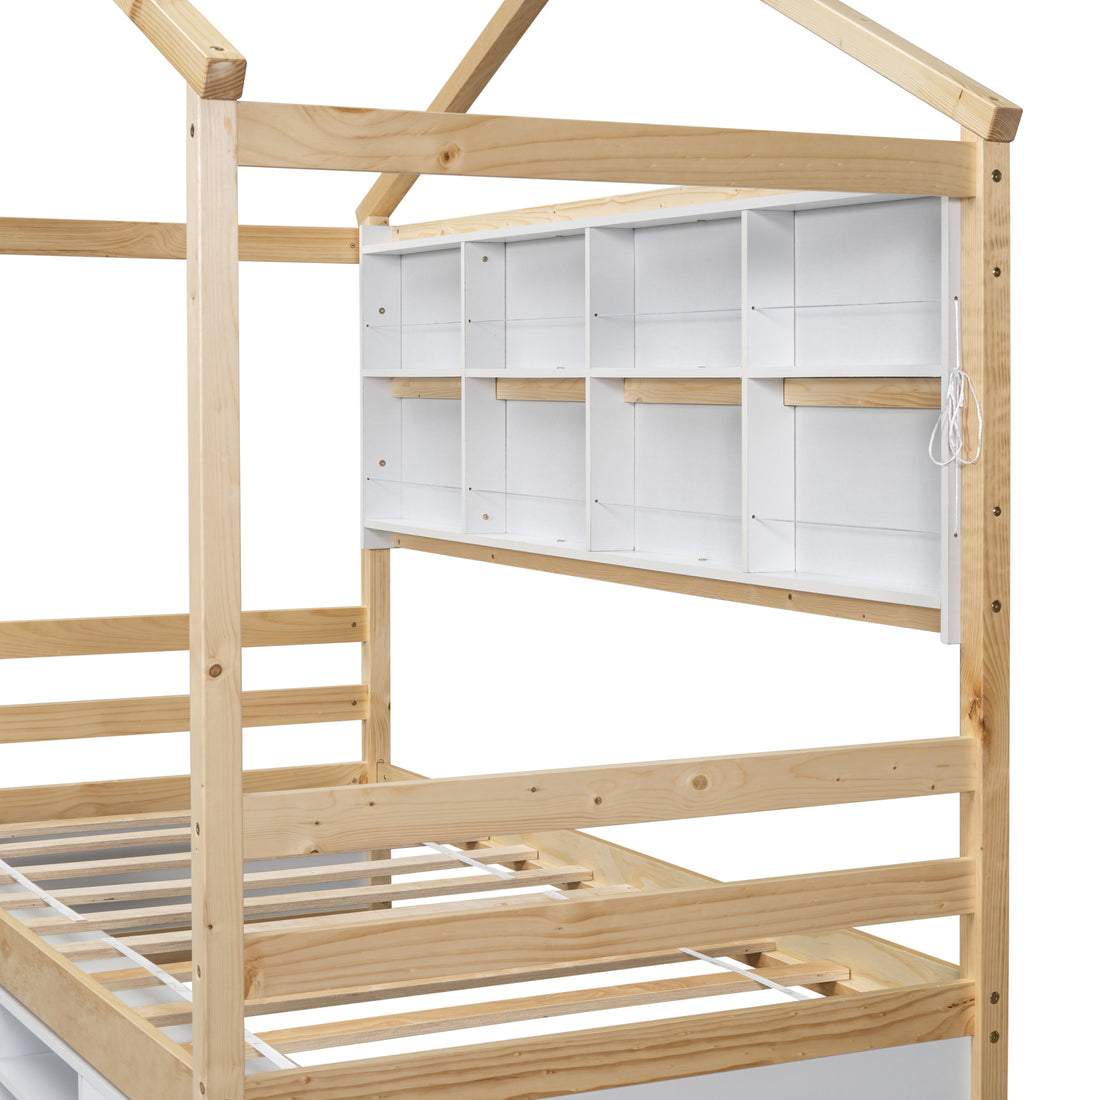 Twin House Bed With Roof Frame, Bedside Shelves,